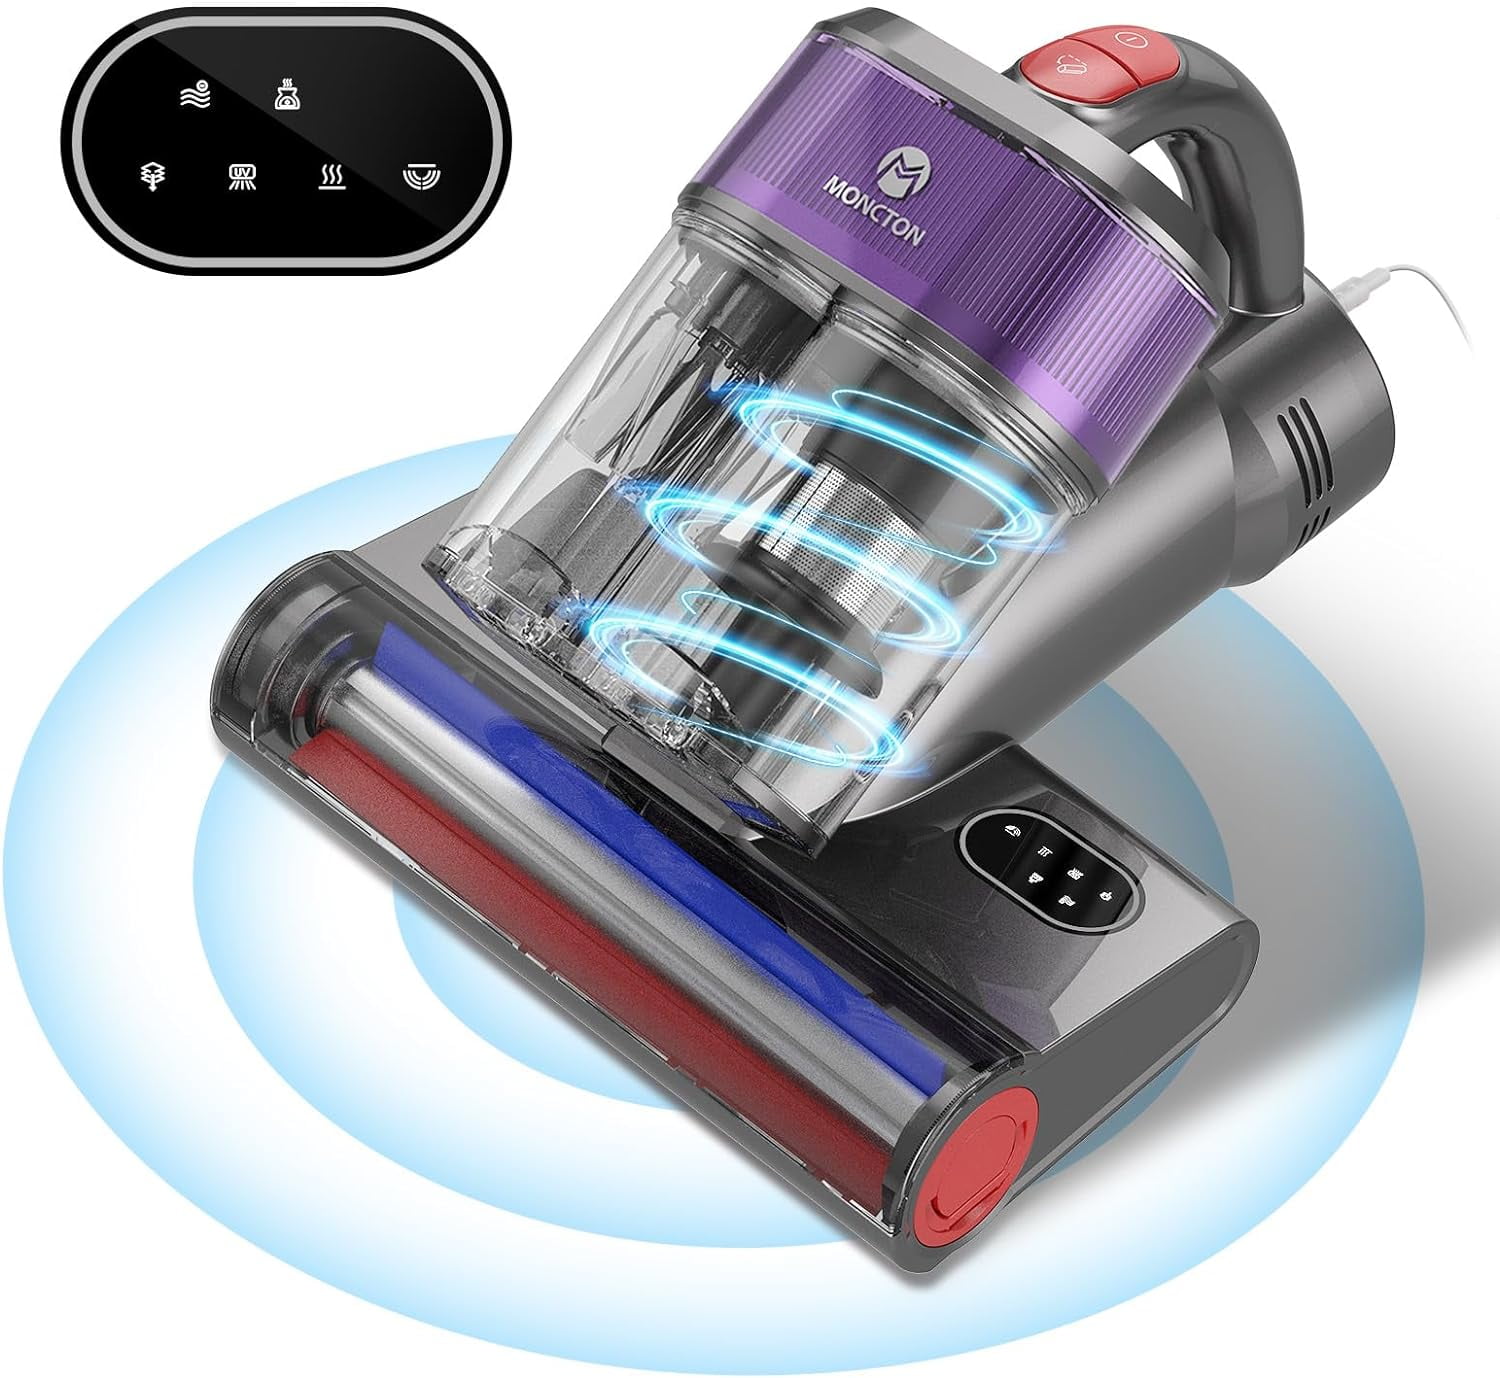 WANHUI Mattress Vacuum Cleaner - 15Kpa Bed Vacuum Cleaner with U/V & Ultrasonic, Smart LED Screen, Dual Dust Cups, Long Corded Handheld Vacuum for Bed Sheet Couch Pillow, Purple